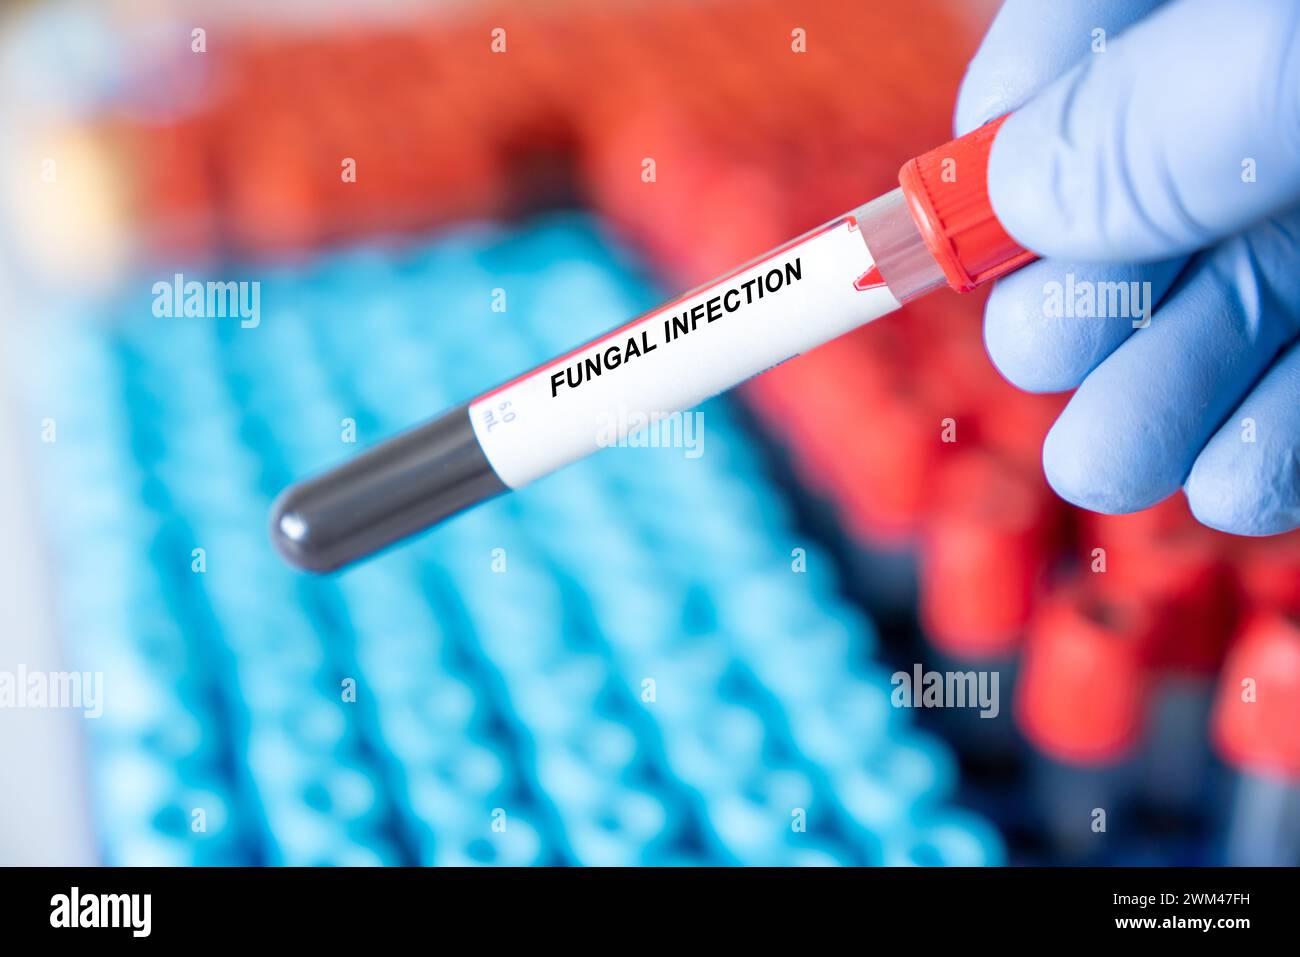 Fungal infection blood test Stock Photo